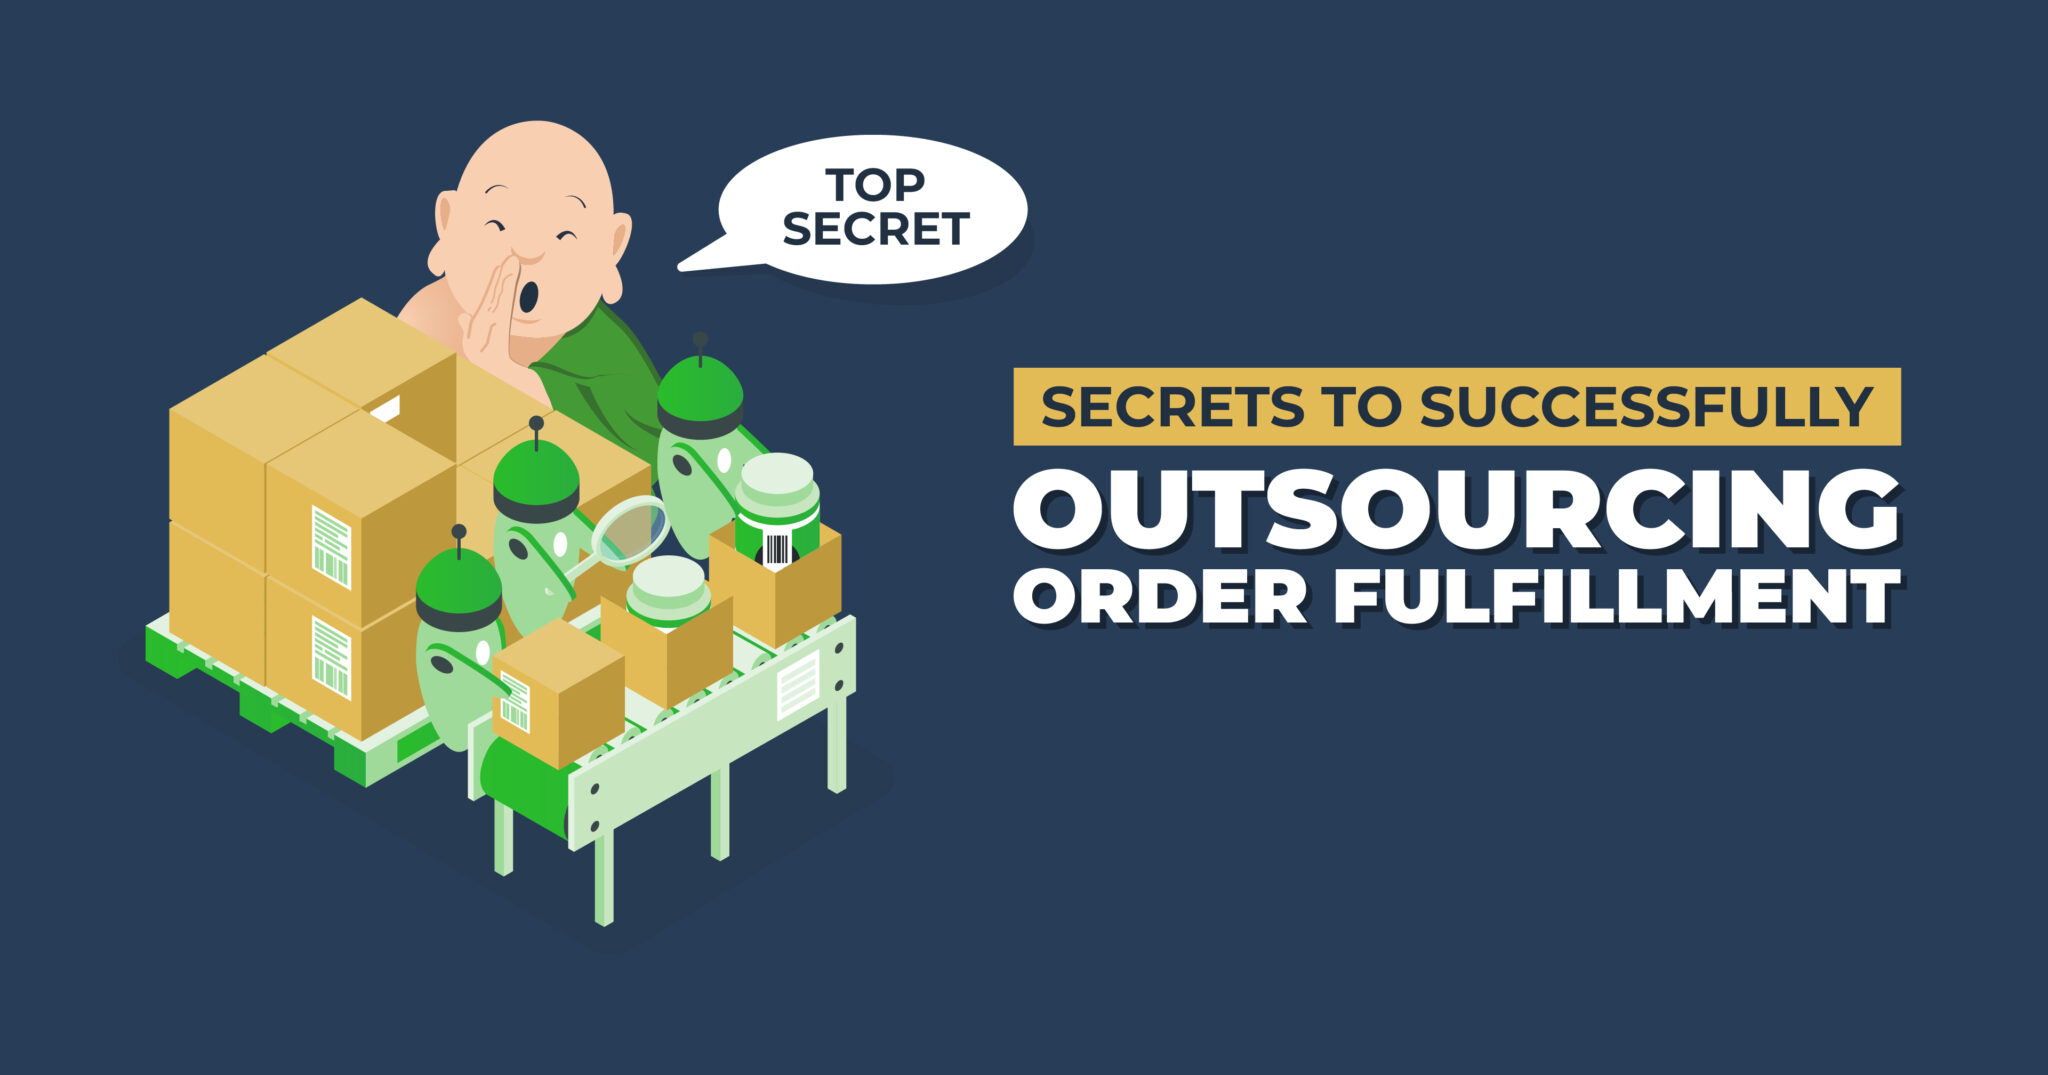 Secrets to Successfully Outsourcing Order Fulfillment